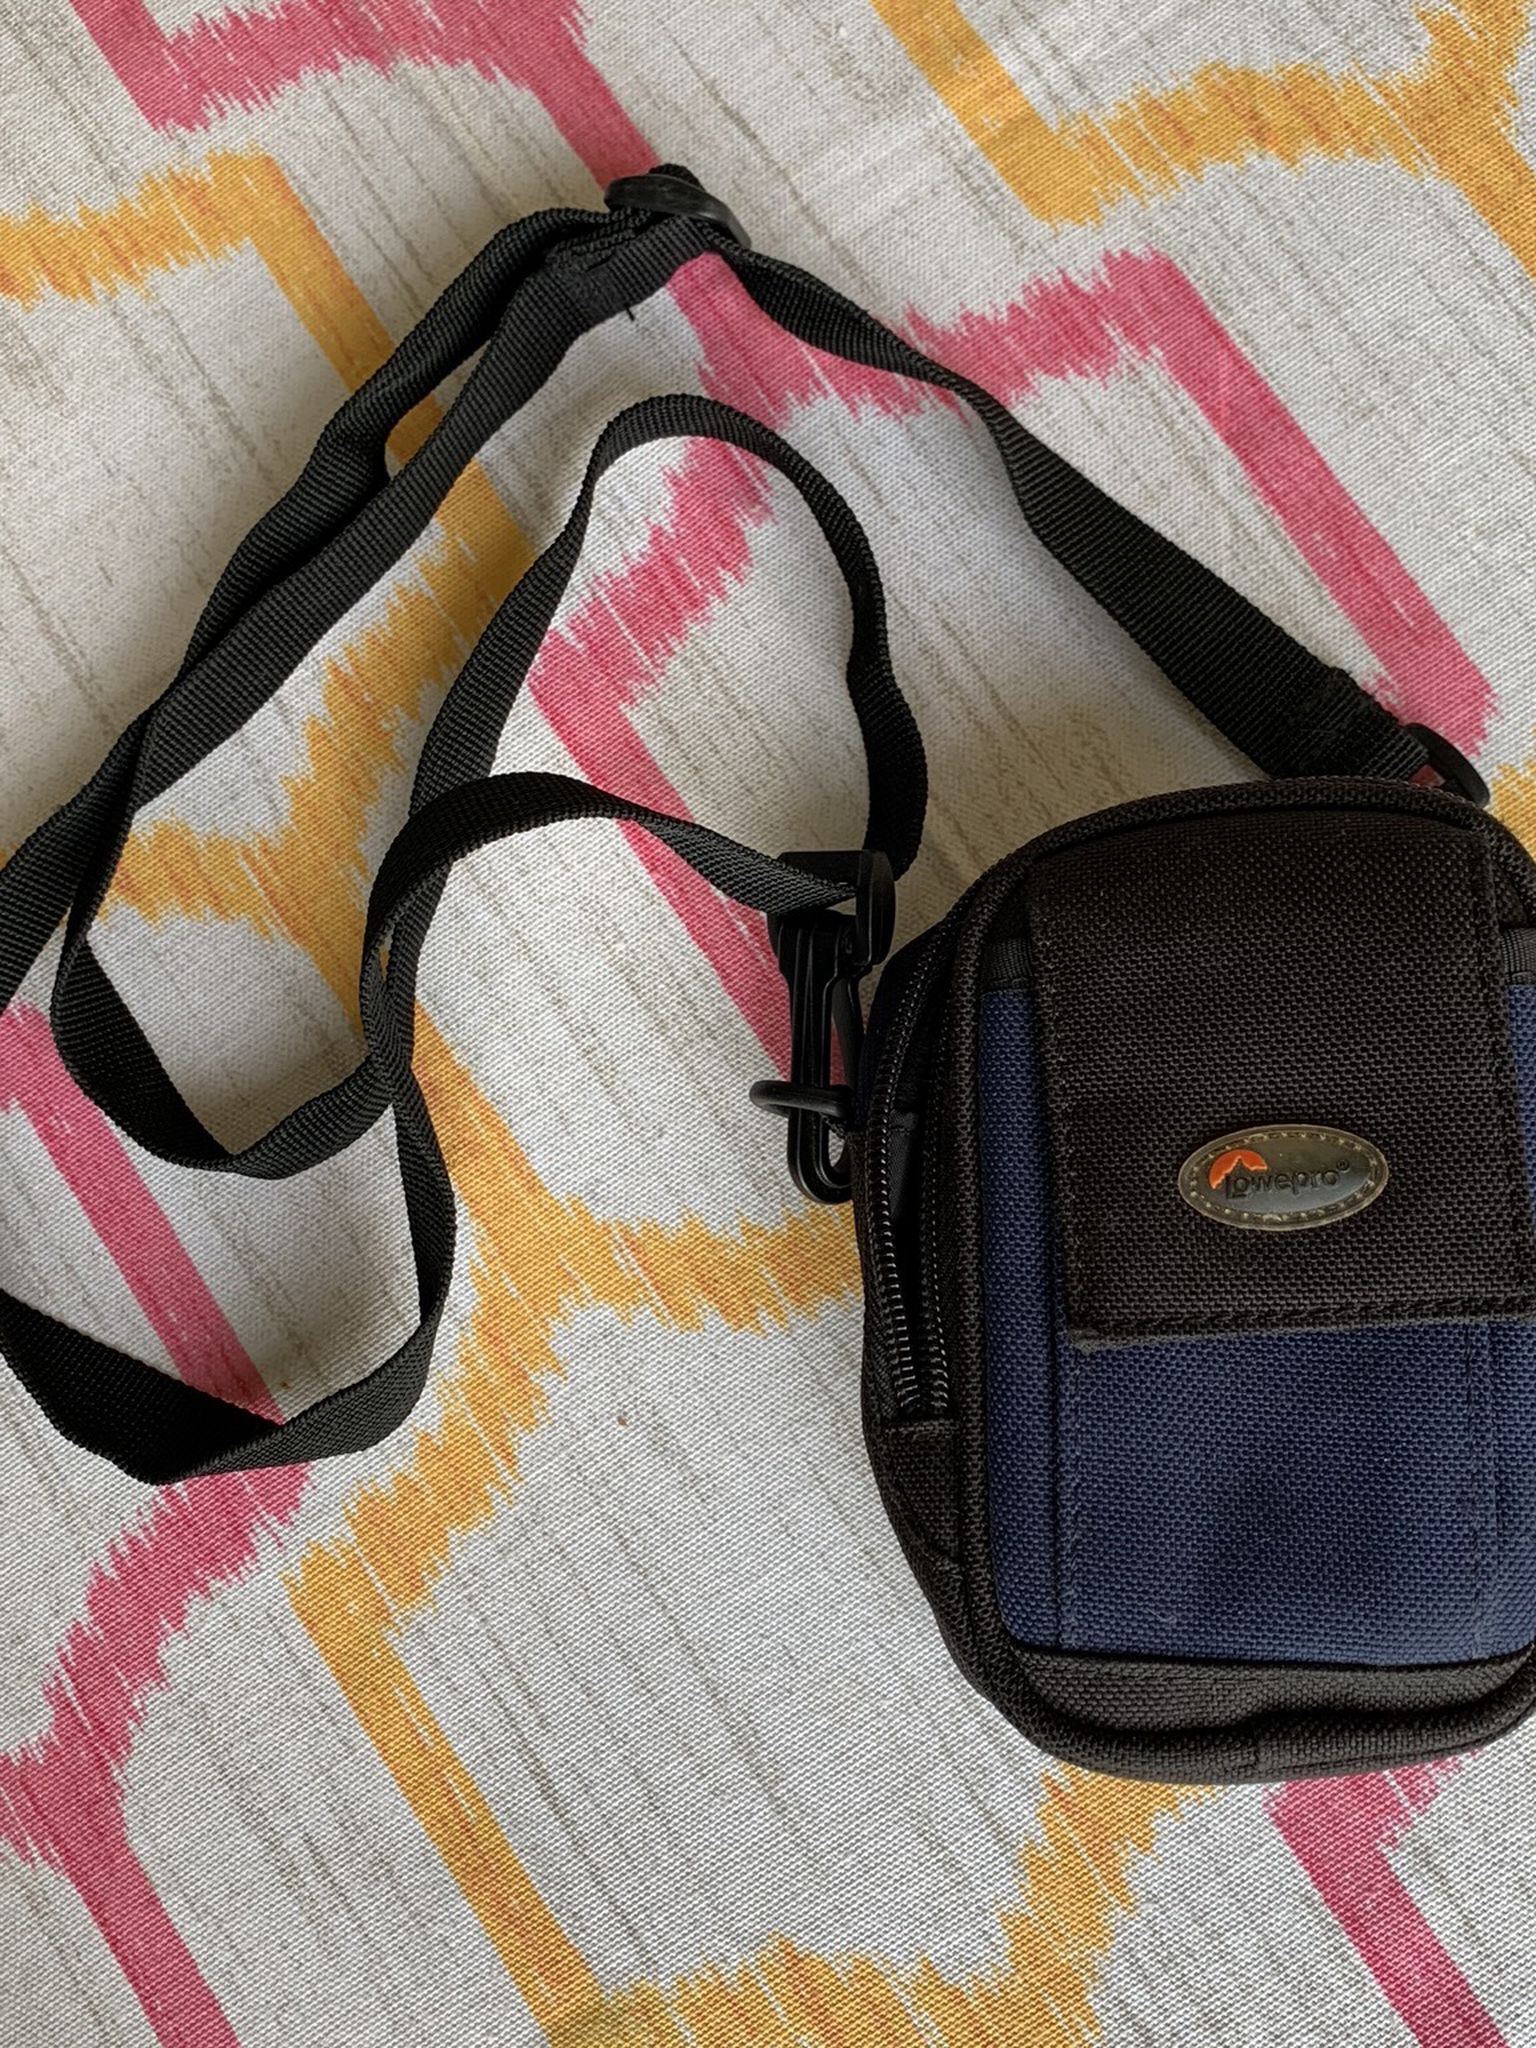 Digital Camera Carrying Case Bag with strap | Cell mobile phone Pouch